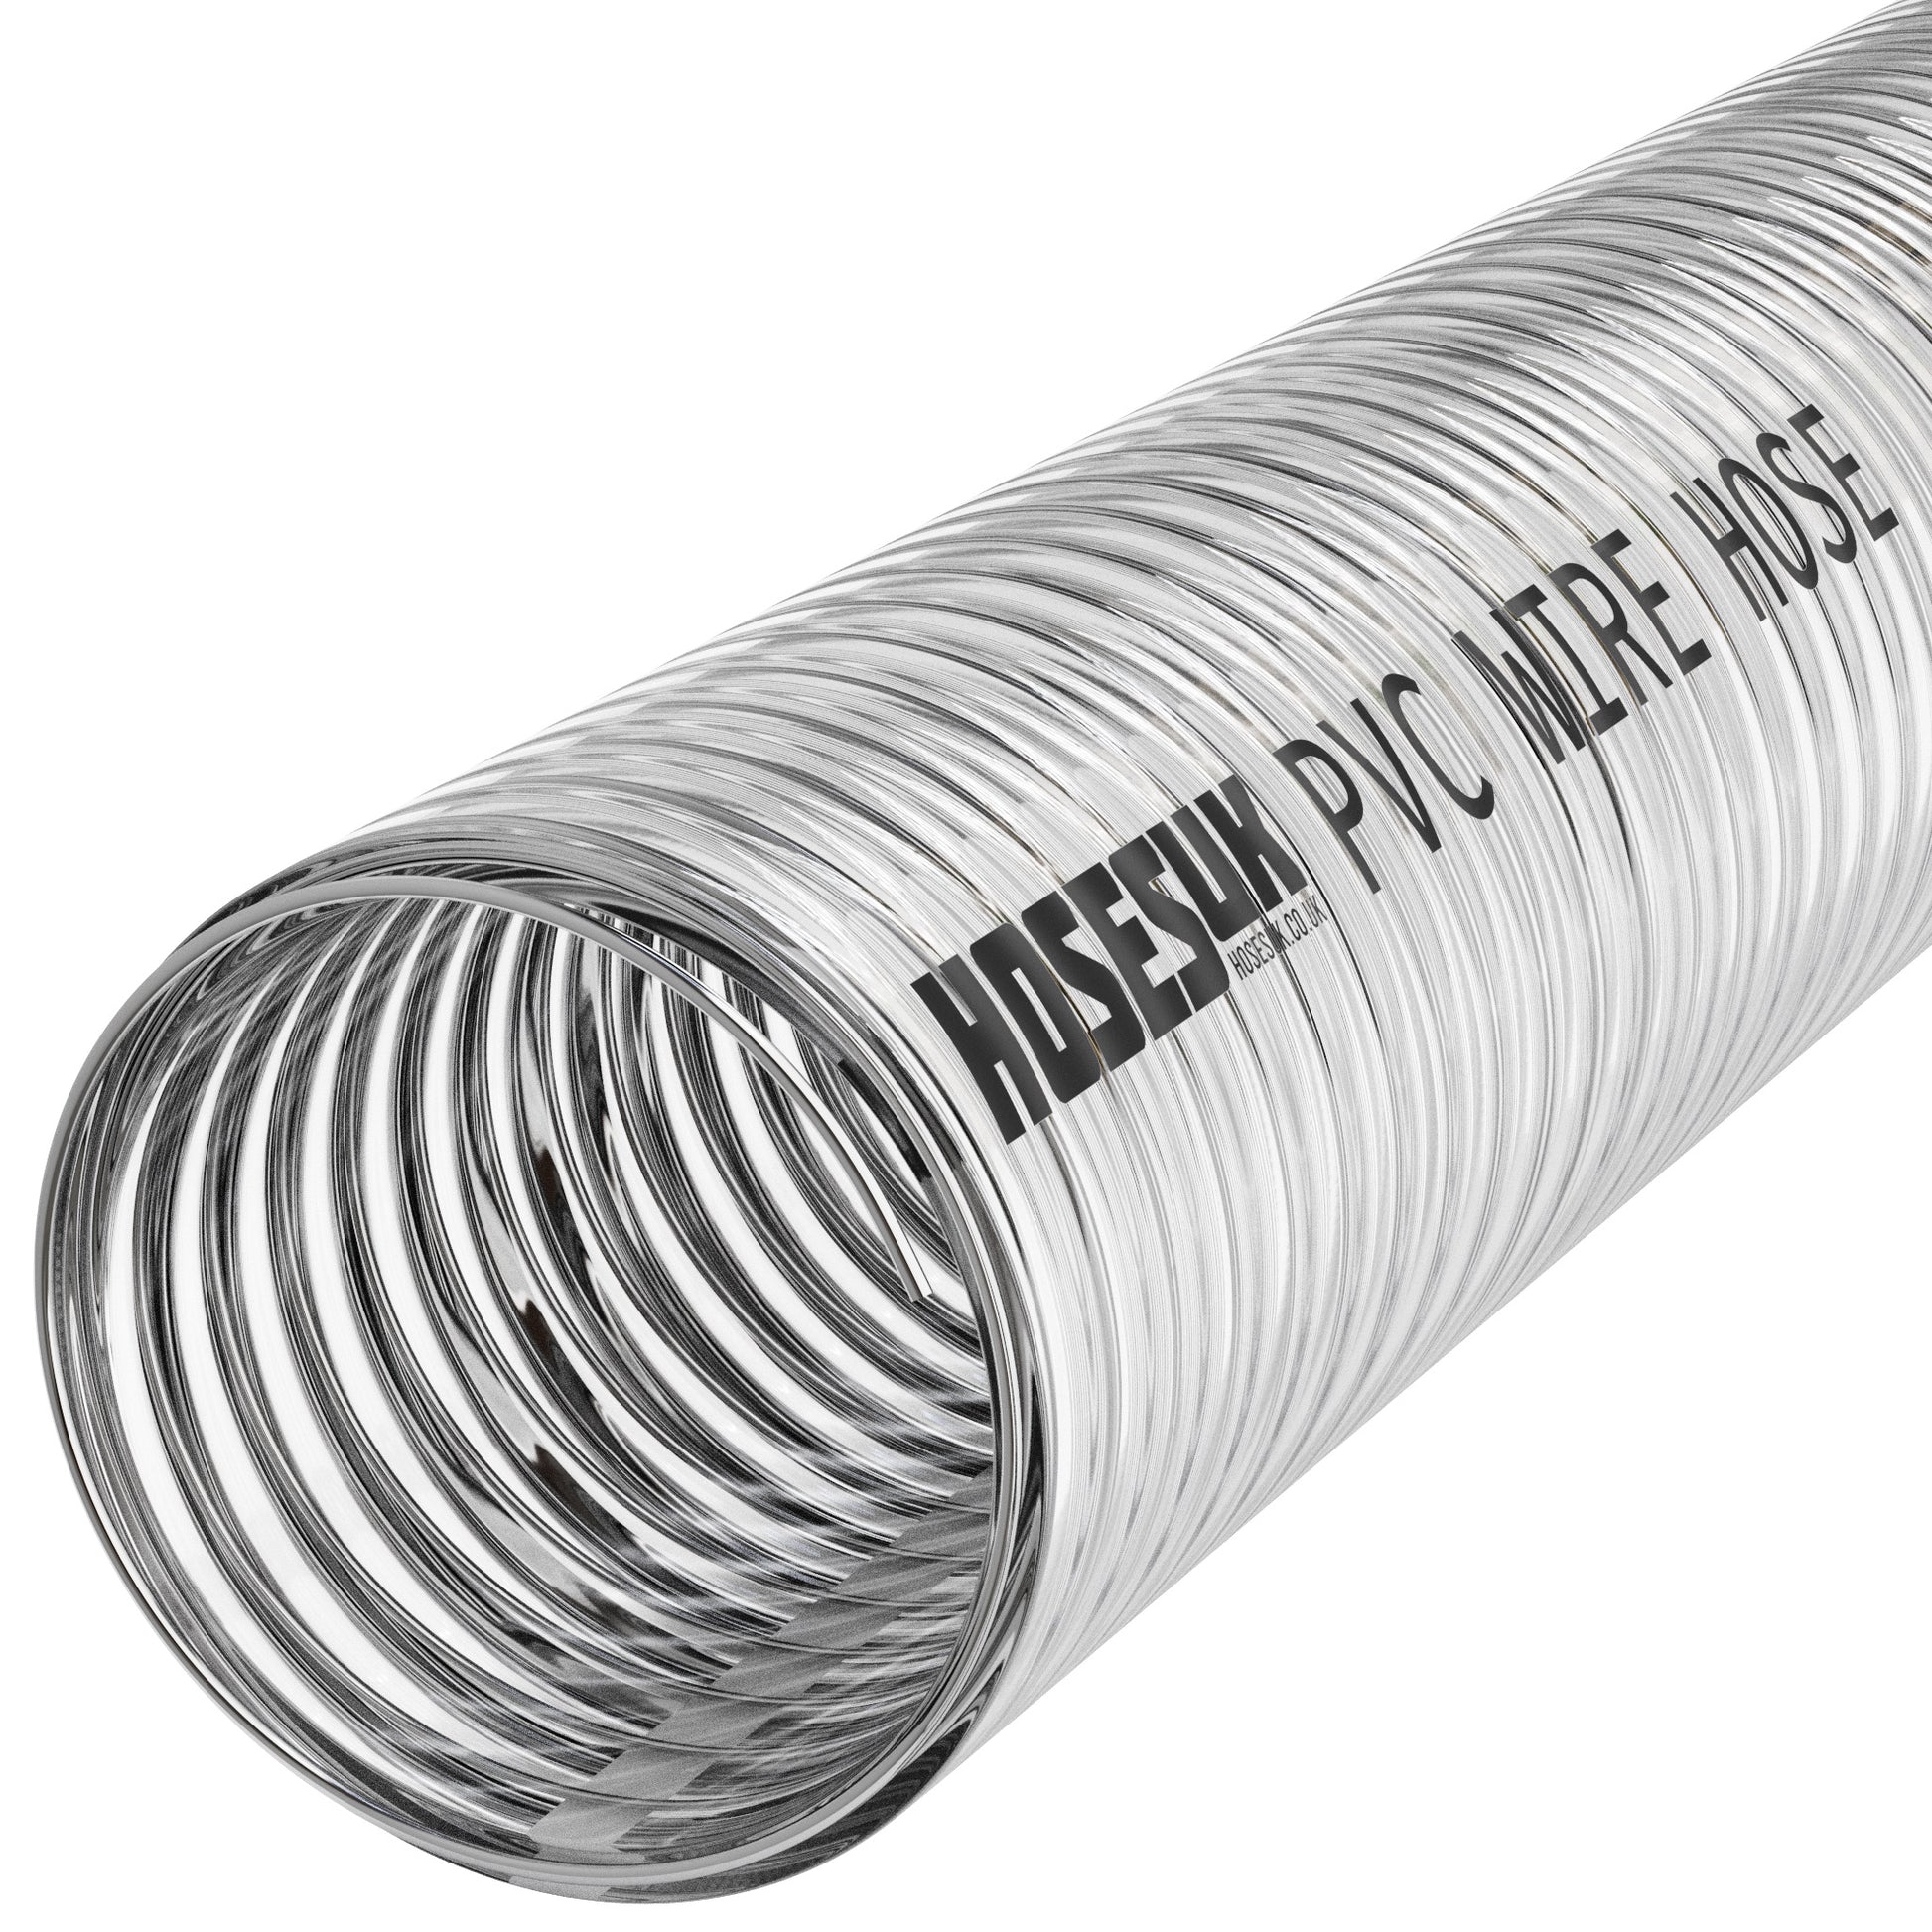 51mm ID PVC Wire Reinforced Clear Hose  Hoses UK   